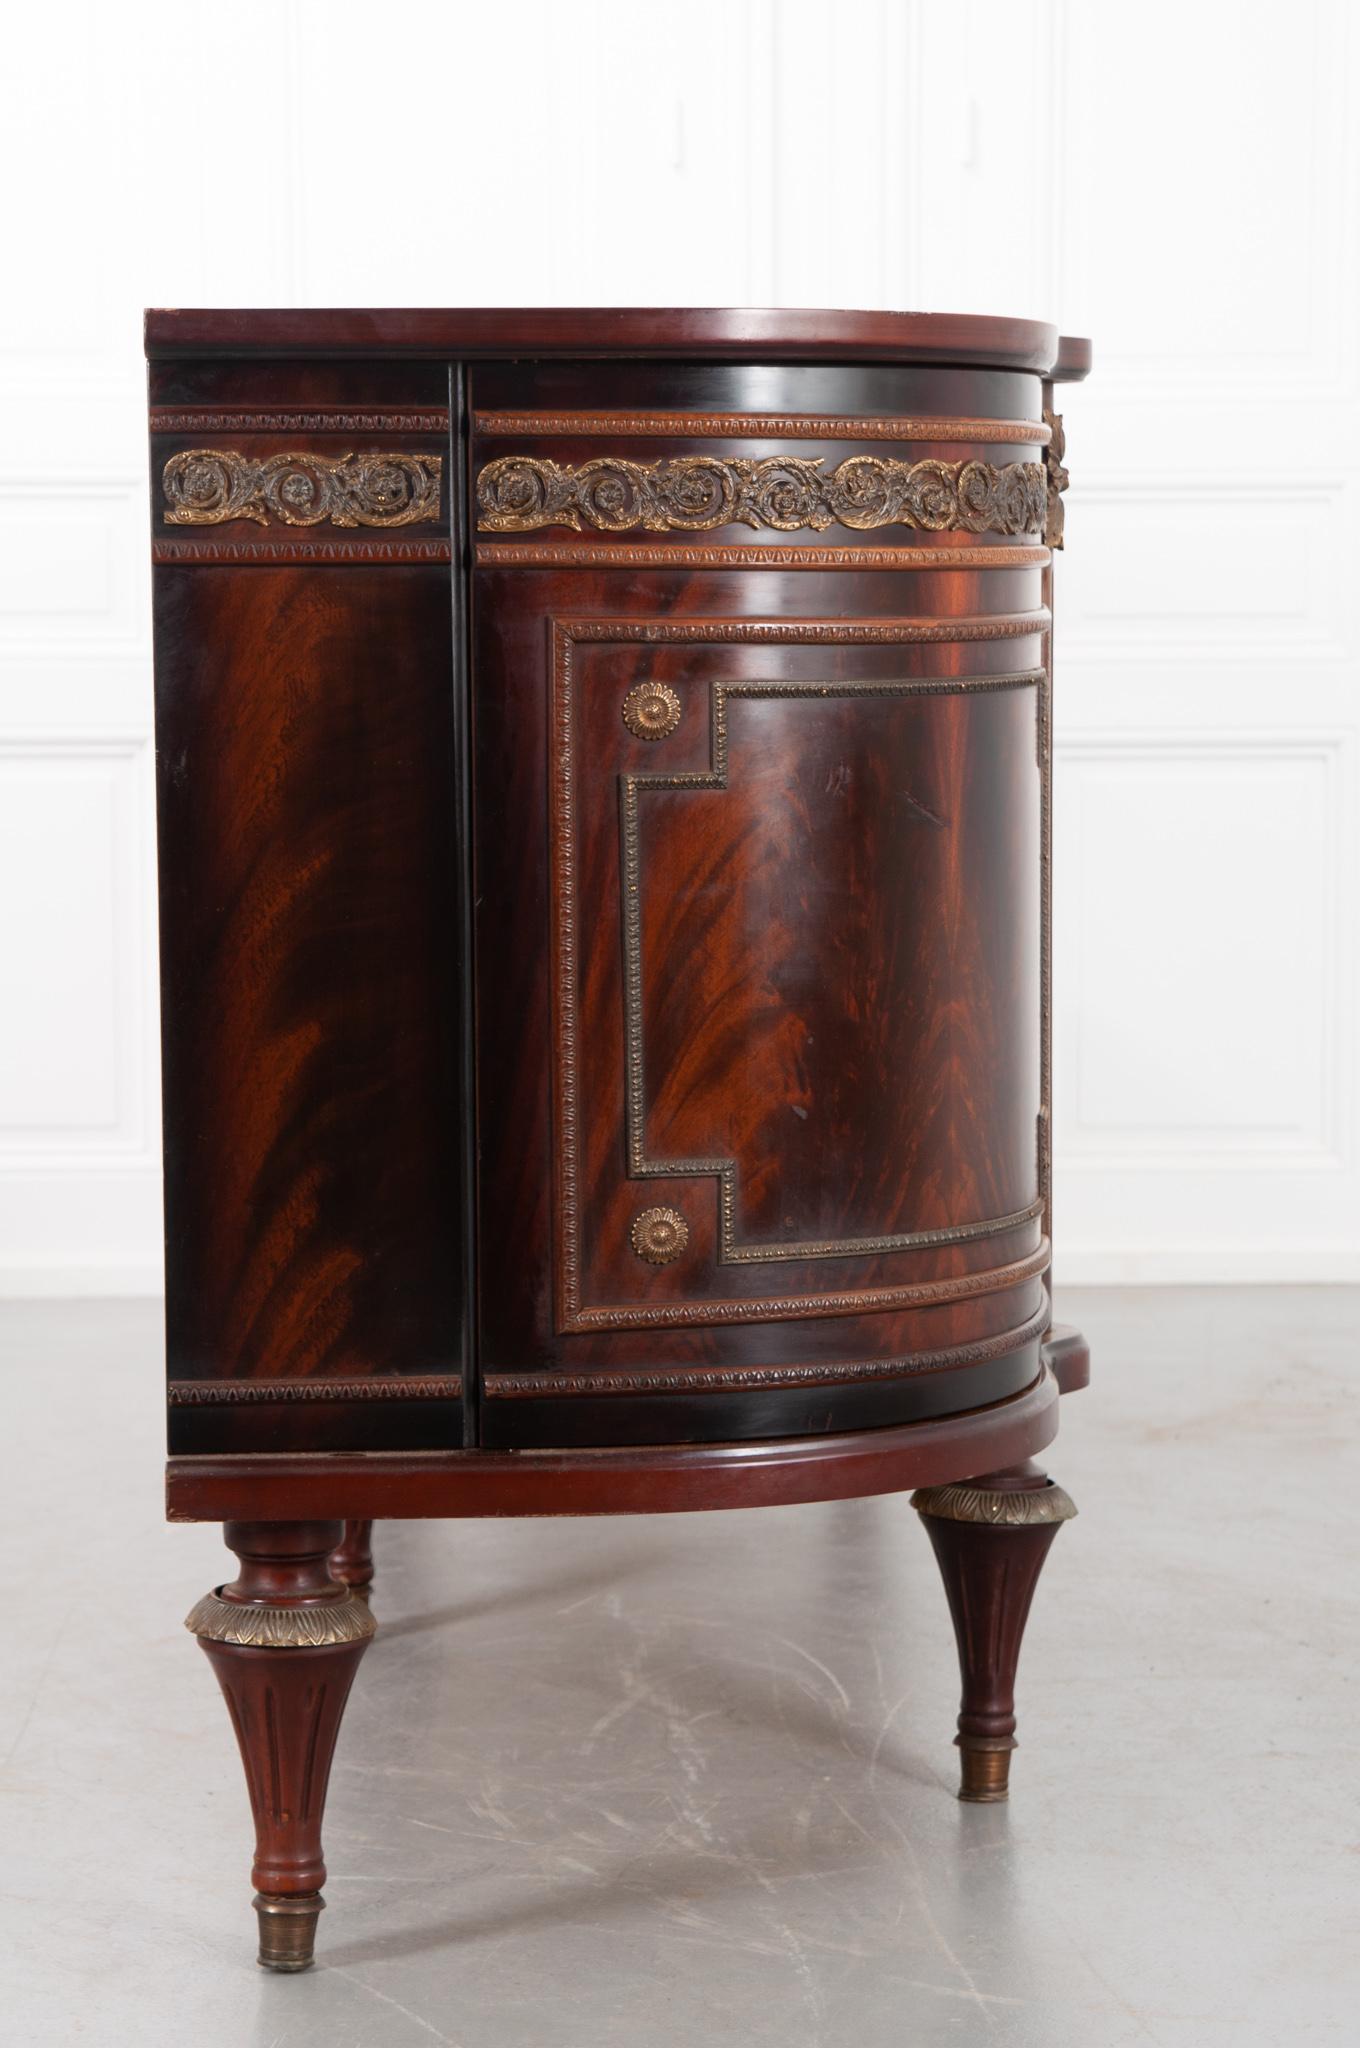 This is a French 20th century five door demilune enfilade, made of mahogany veneer with impressive ormolu accents. The curved end doors conceal two fixed glass shelves each. The center doors allow for more storage space with the far left door and